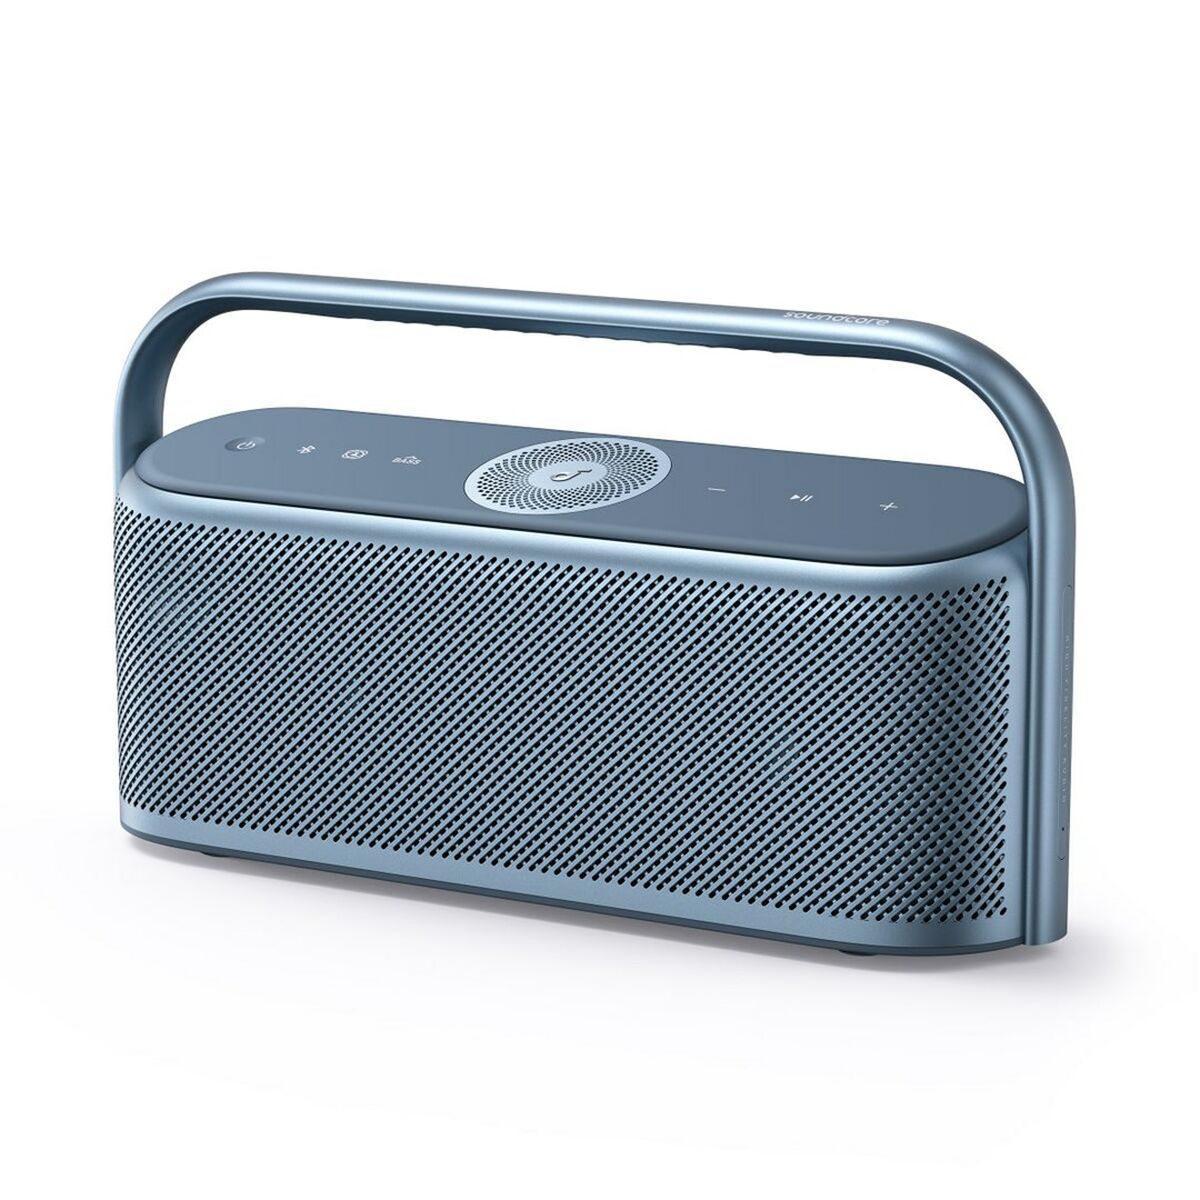 Portable Bluetooth Speakers Soundcore A3130031 Blue 50 W, Soundcore, Electronics, Mobile communication and accessories, portable-bluetooth-speakers-soundcore-a3130031-blue-50-w, Brand_Soundcore, category-reference-2609, category-reference-2882, category-reference-2923, category-reference-t-19653, category-reference-t-21311, category-reference-t-25527, category-reference-t-4036, category-reference-t-4037, Condition_NEW, entertainment, music, Price_100 - 200, telephones & tablets, wifi y bluetooth, RiotNook